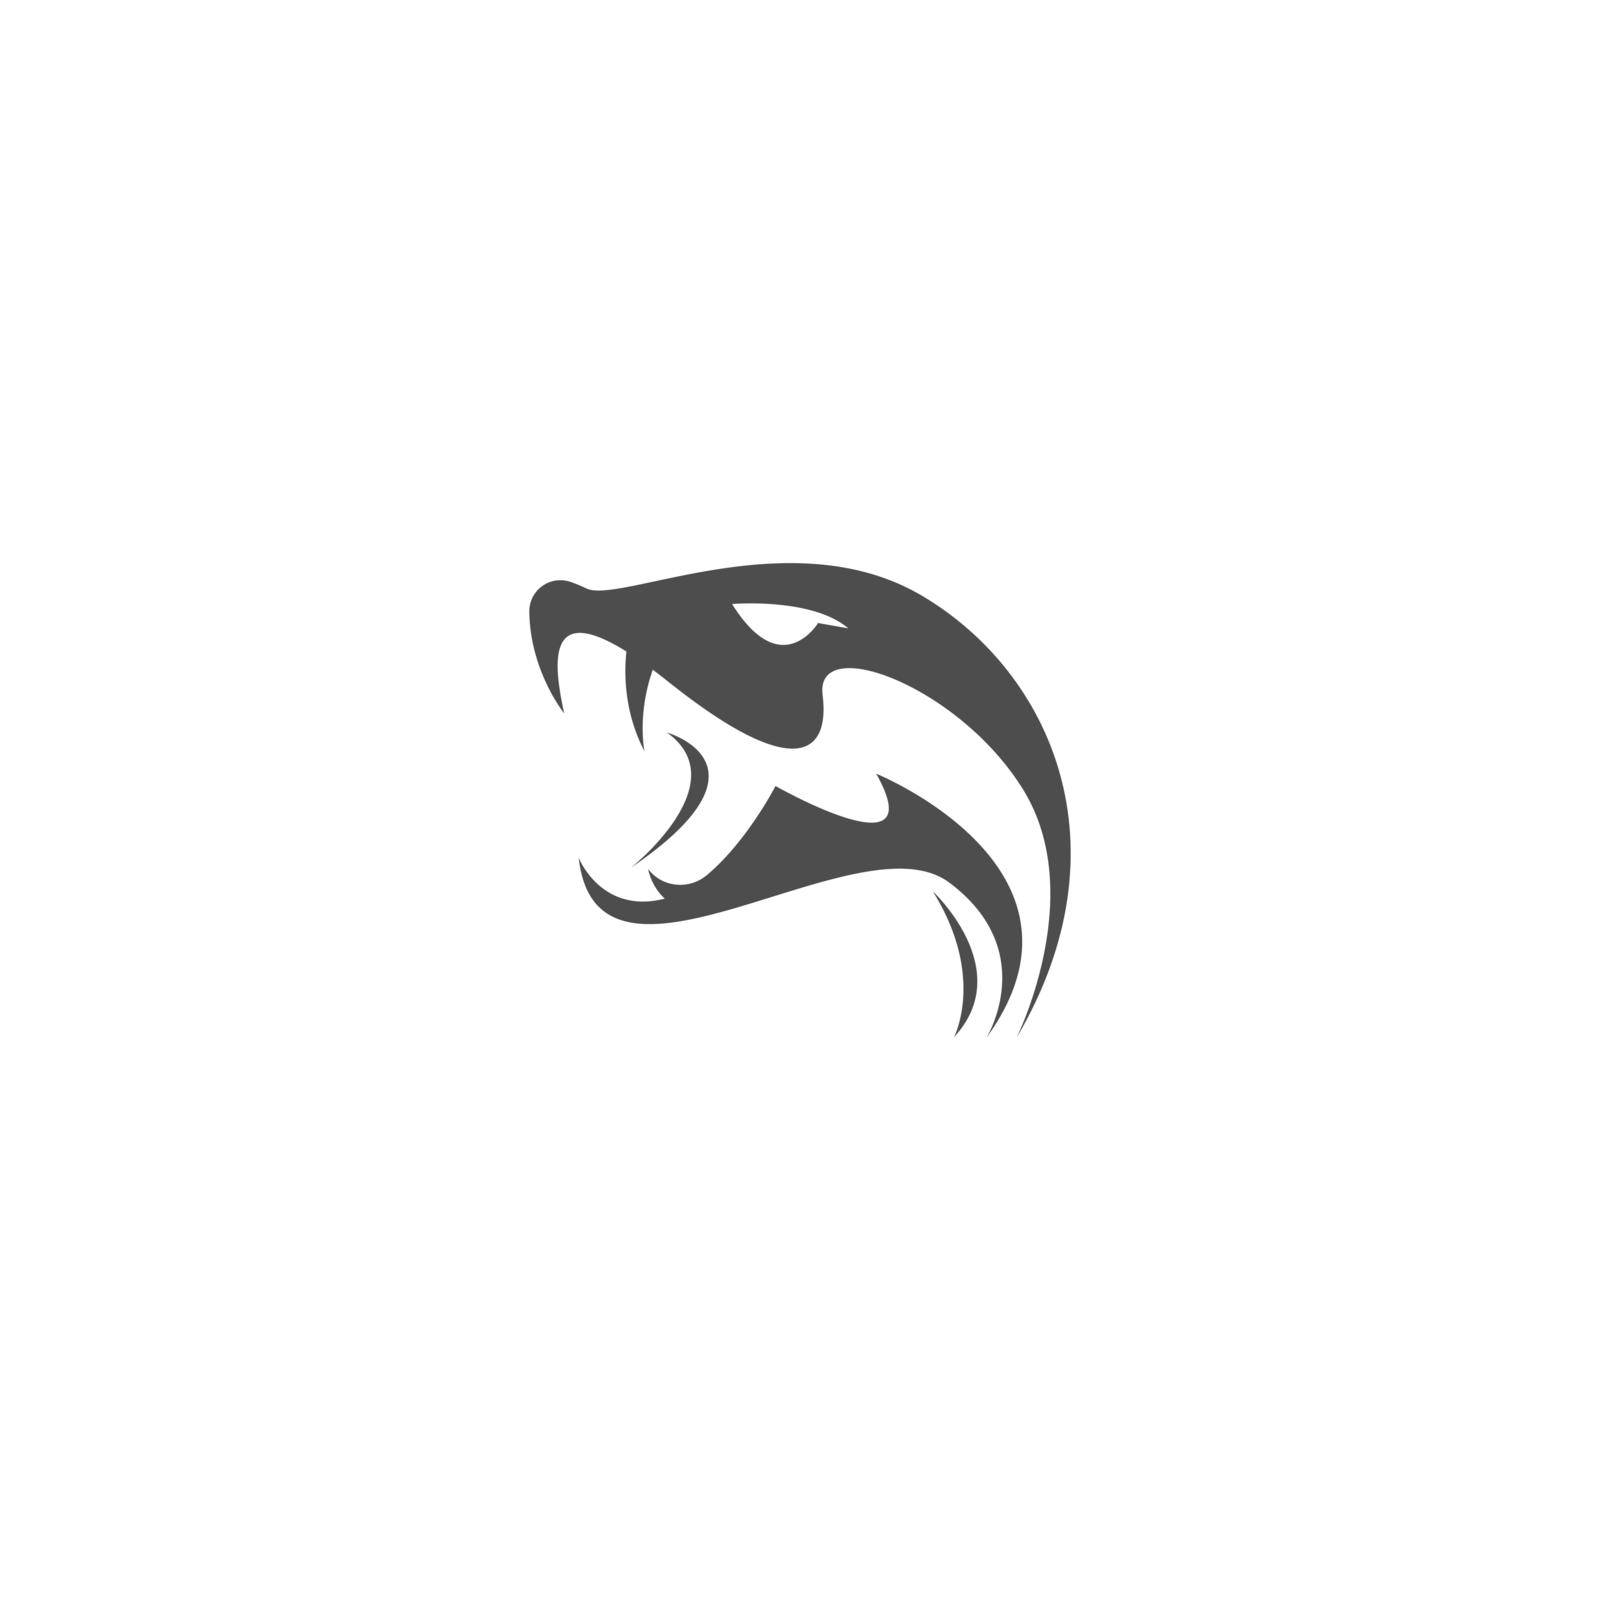 Snake icon logo design vector template by bellaxbudhong3